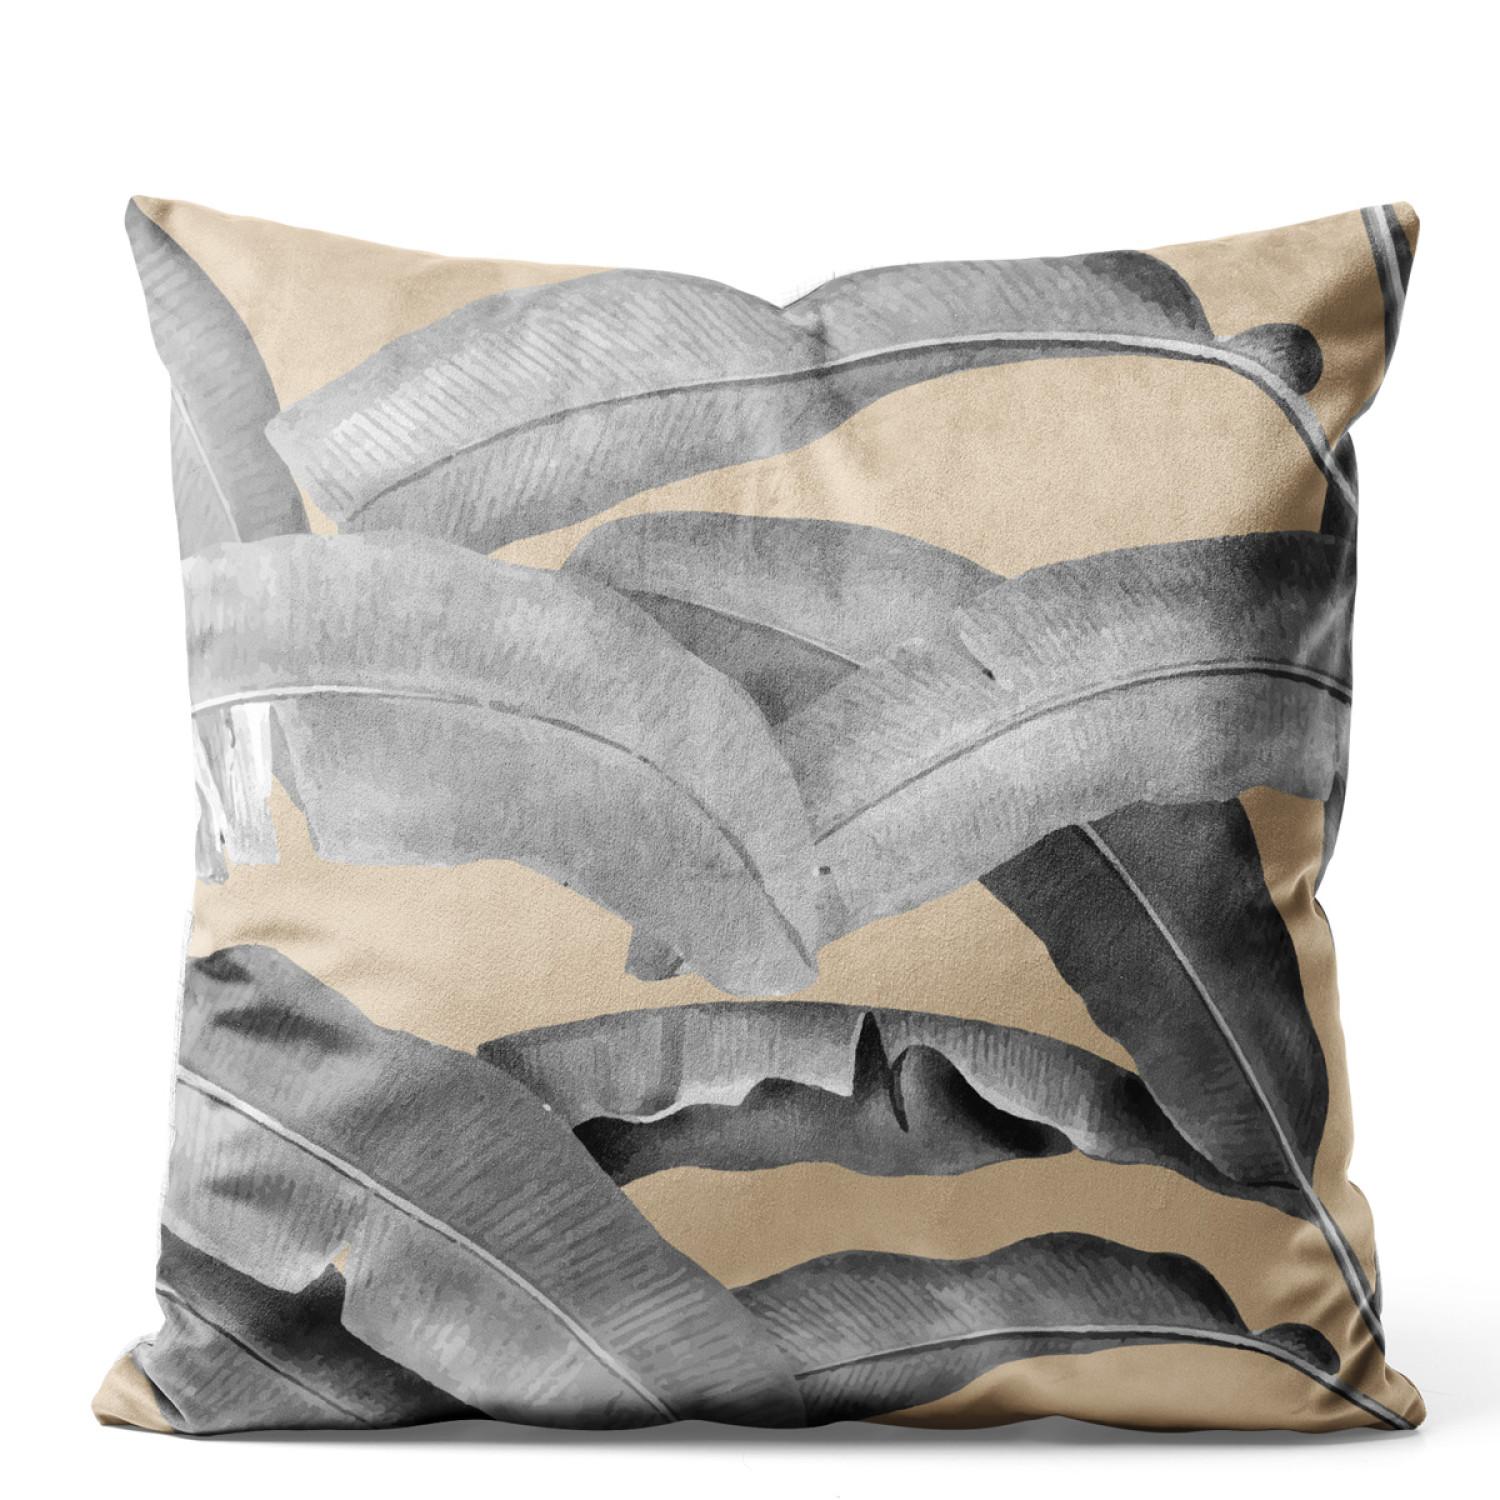 Cojin de velour Leafy curtain in grey - floral pattern with banana tree